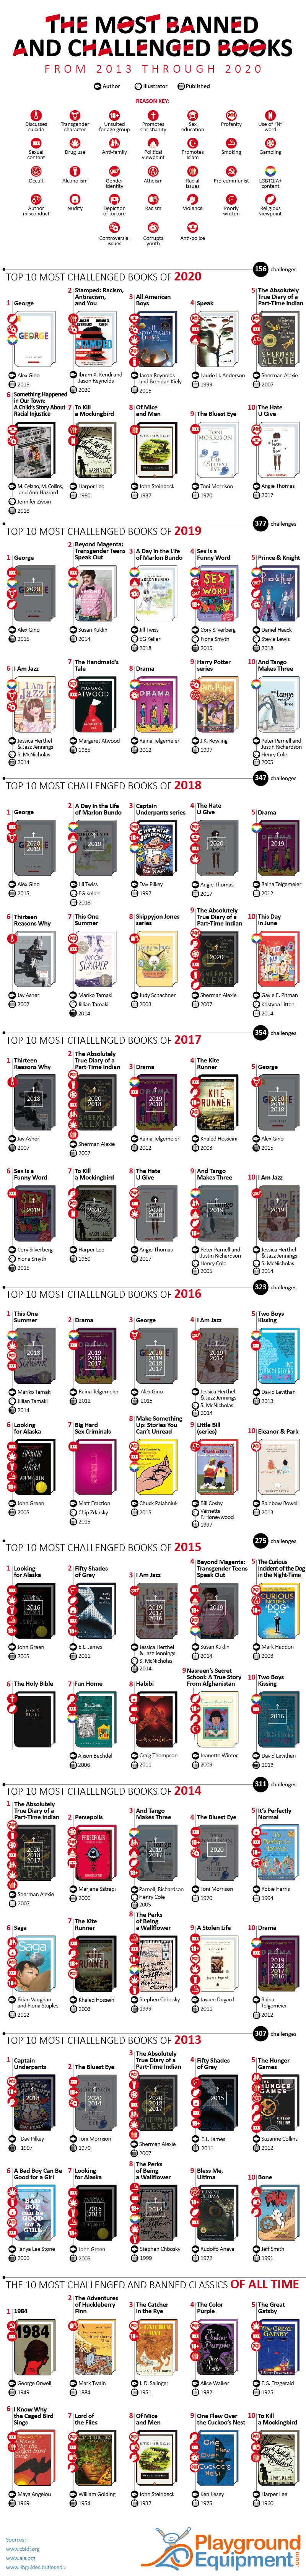 The Most Banned and Challenged Books of the Past 8 Years PlaygroundEquipment